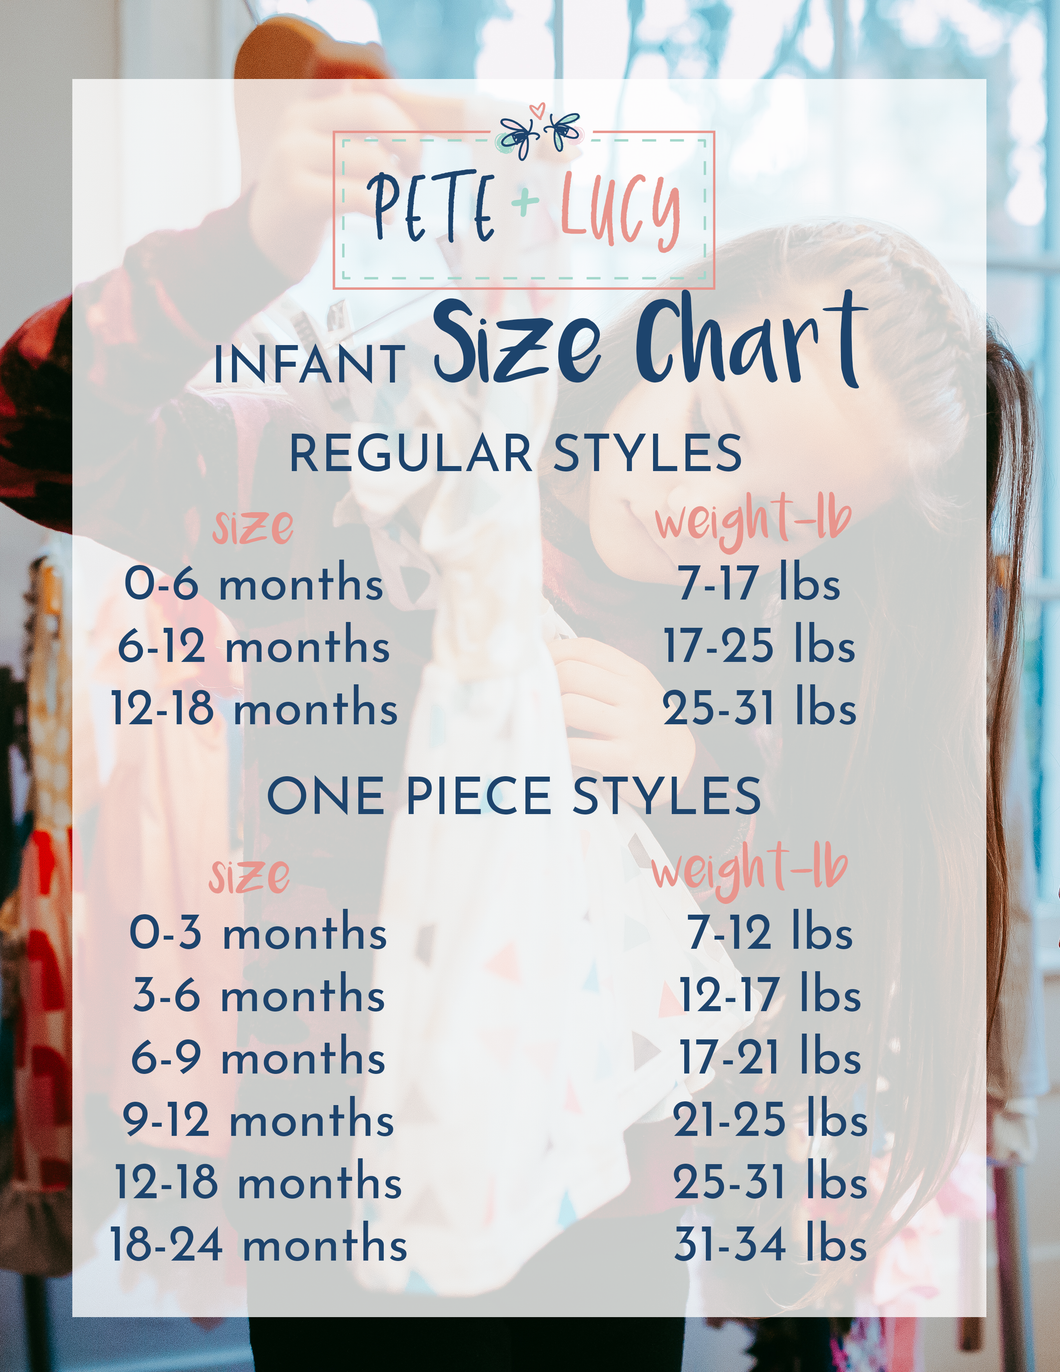 Pete + Lucy Infant Size Chart